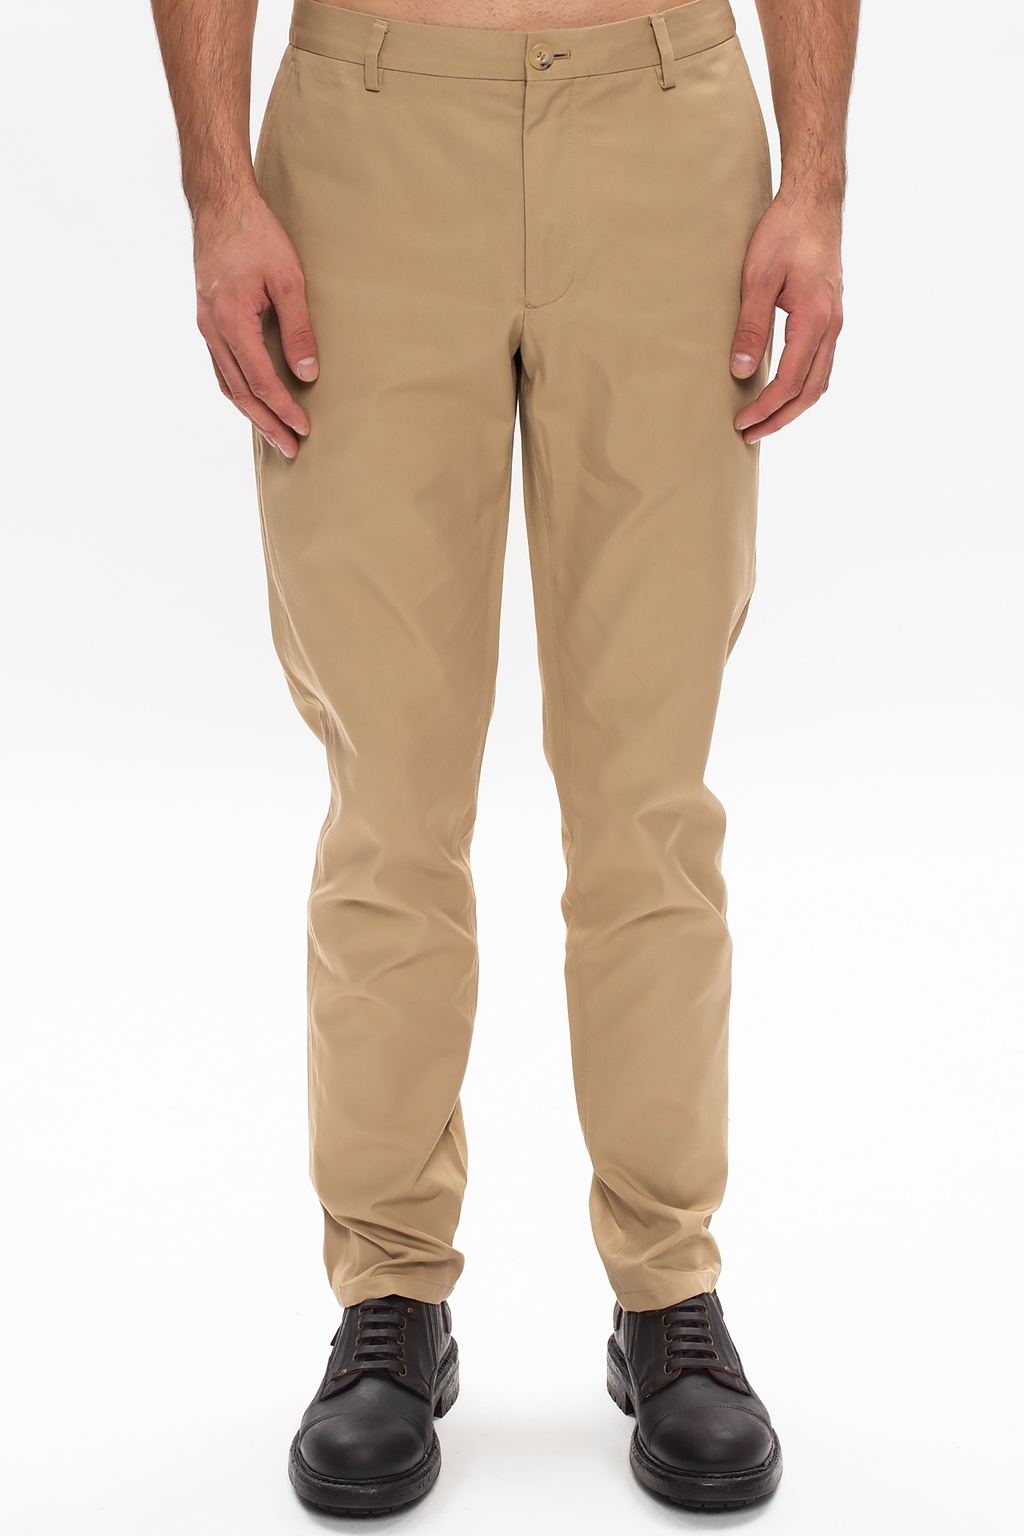 Burberry Cotton chino Stretch trousers